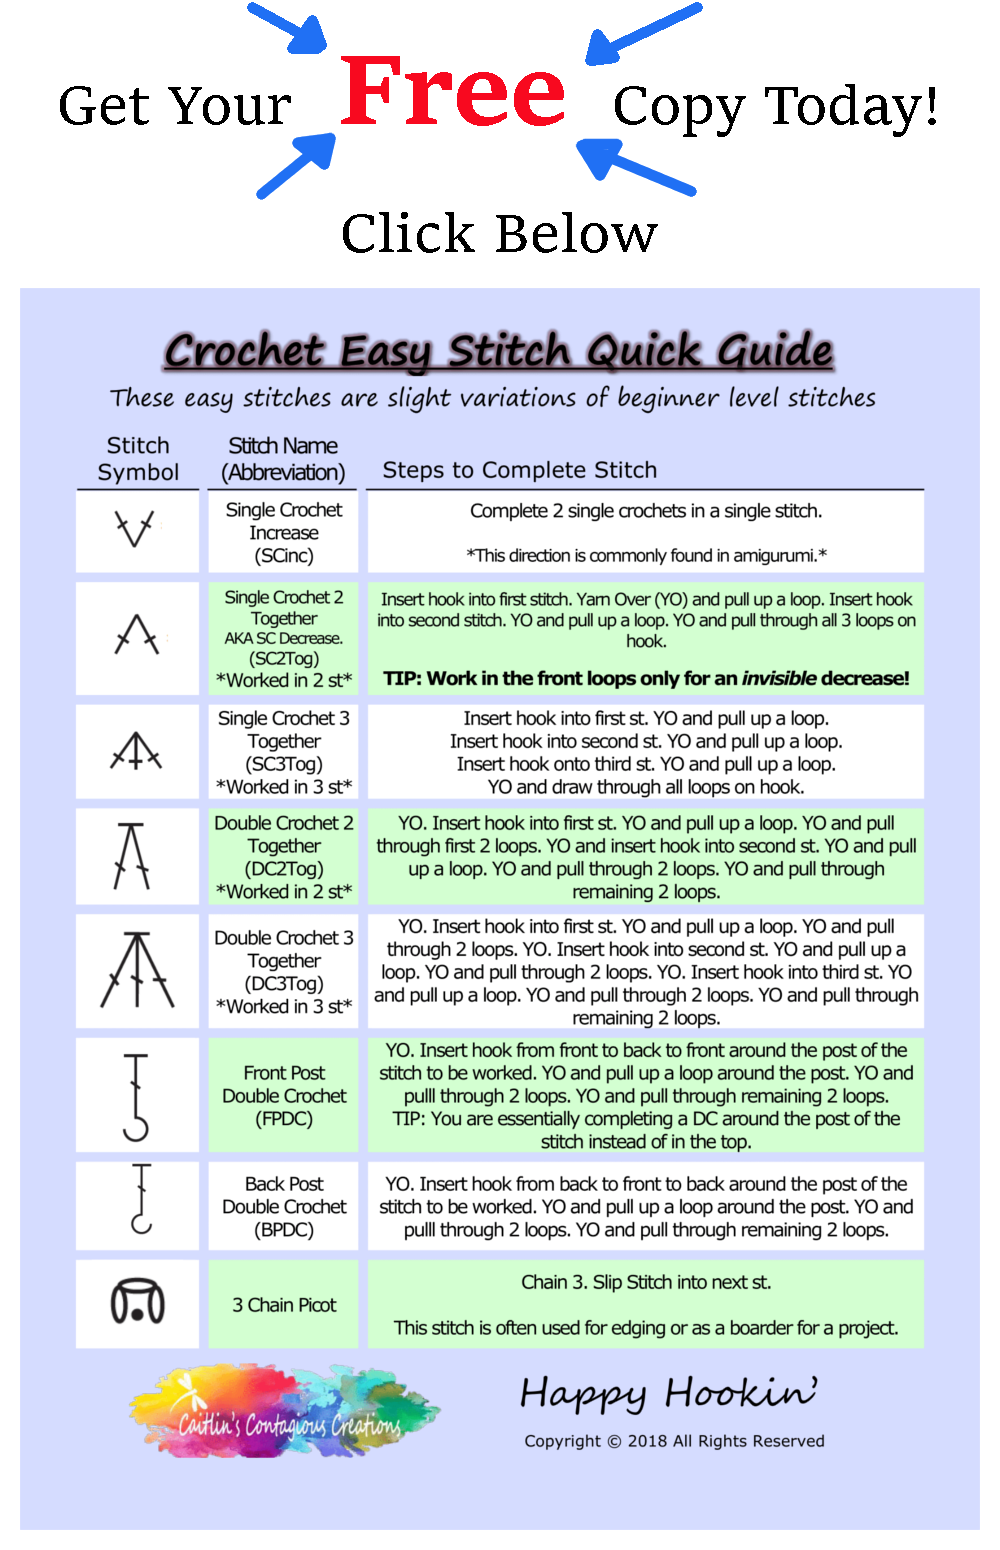 A crochet stitch mini tutorial with directions and stitch symbols for easy crochet stitches. This printable PDF quick guide is available from Caitlin's Contagious Creations.